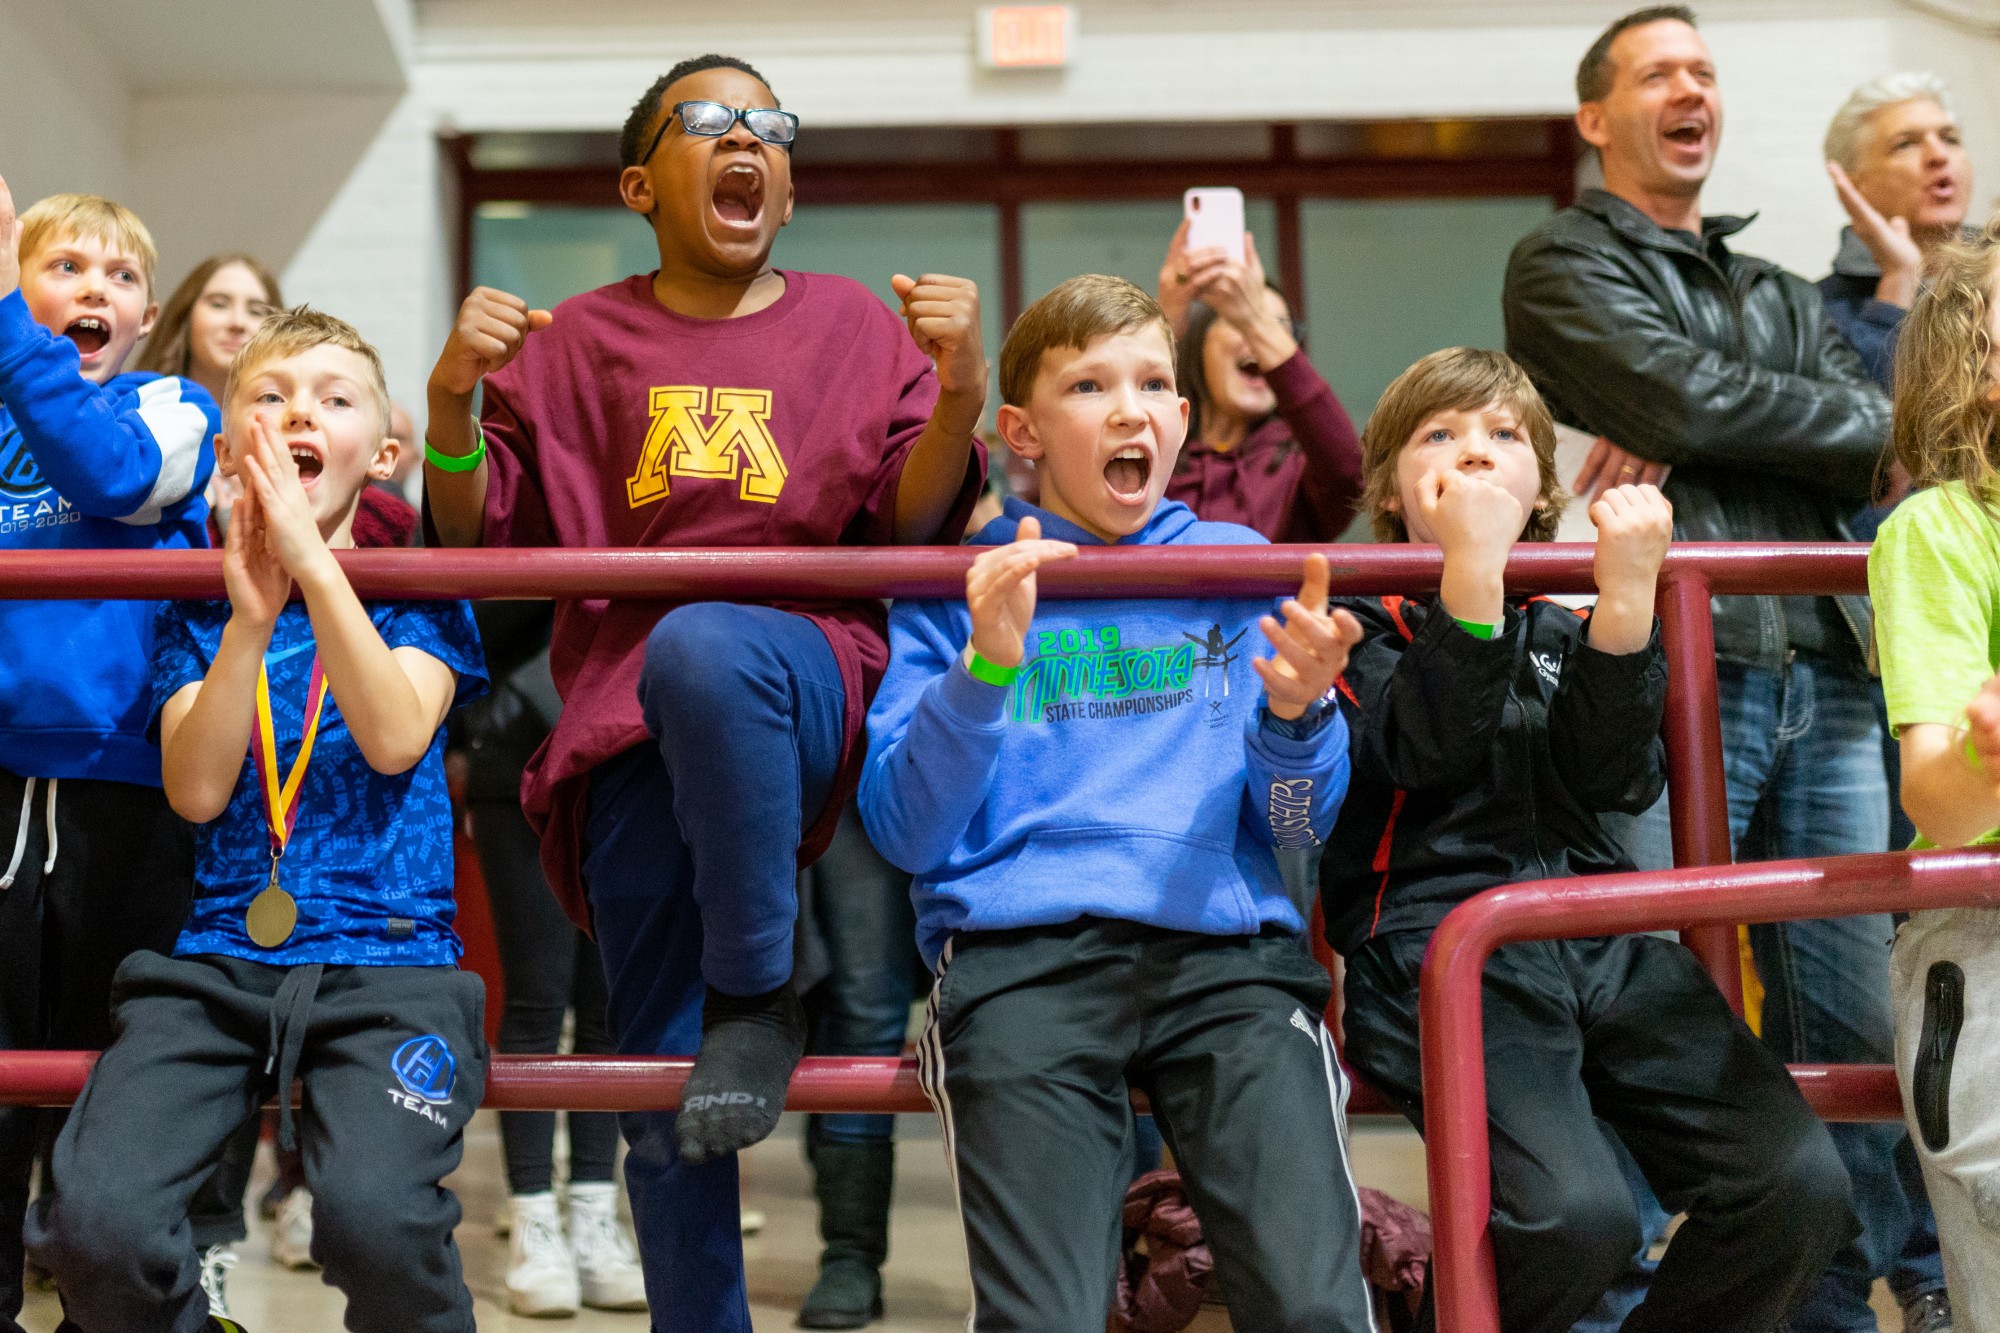 Young fans cheer as Gophers Junior Russell Johnson completes a routine on the high bar. The Gophers went on to a 398-375.55 victory over the Washington Huskies.